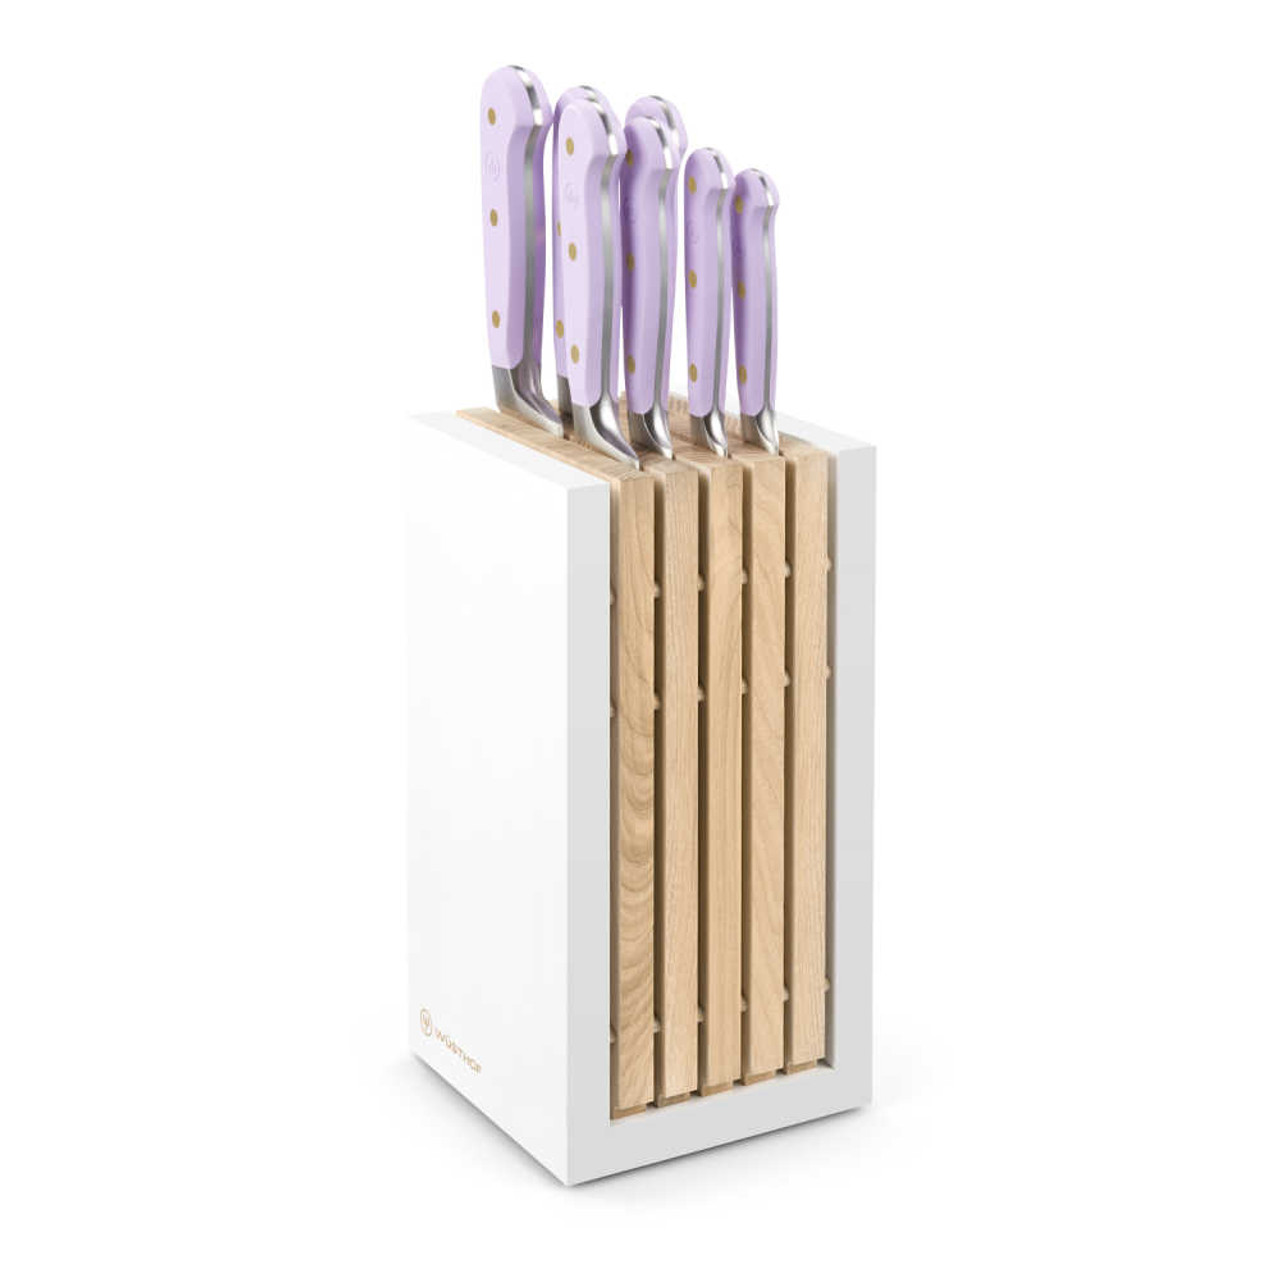 https://cdn11.bigcommerce.com/s-hccytny0od/images/stencil/1280x1280/products/5391/23396/Wusthof_Classic_Color_8-Piece_Knife_Block_Set_Purple_Yam__98739.1682004657.jpg?c=2?imbypass=on